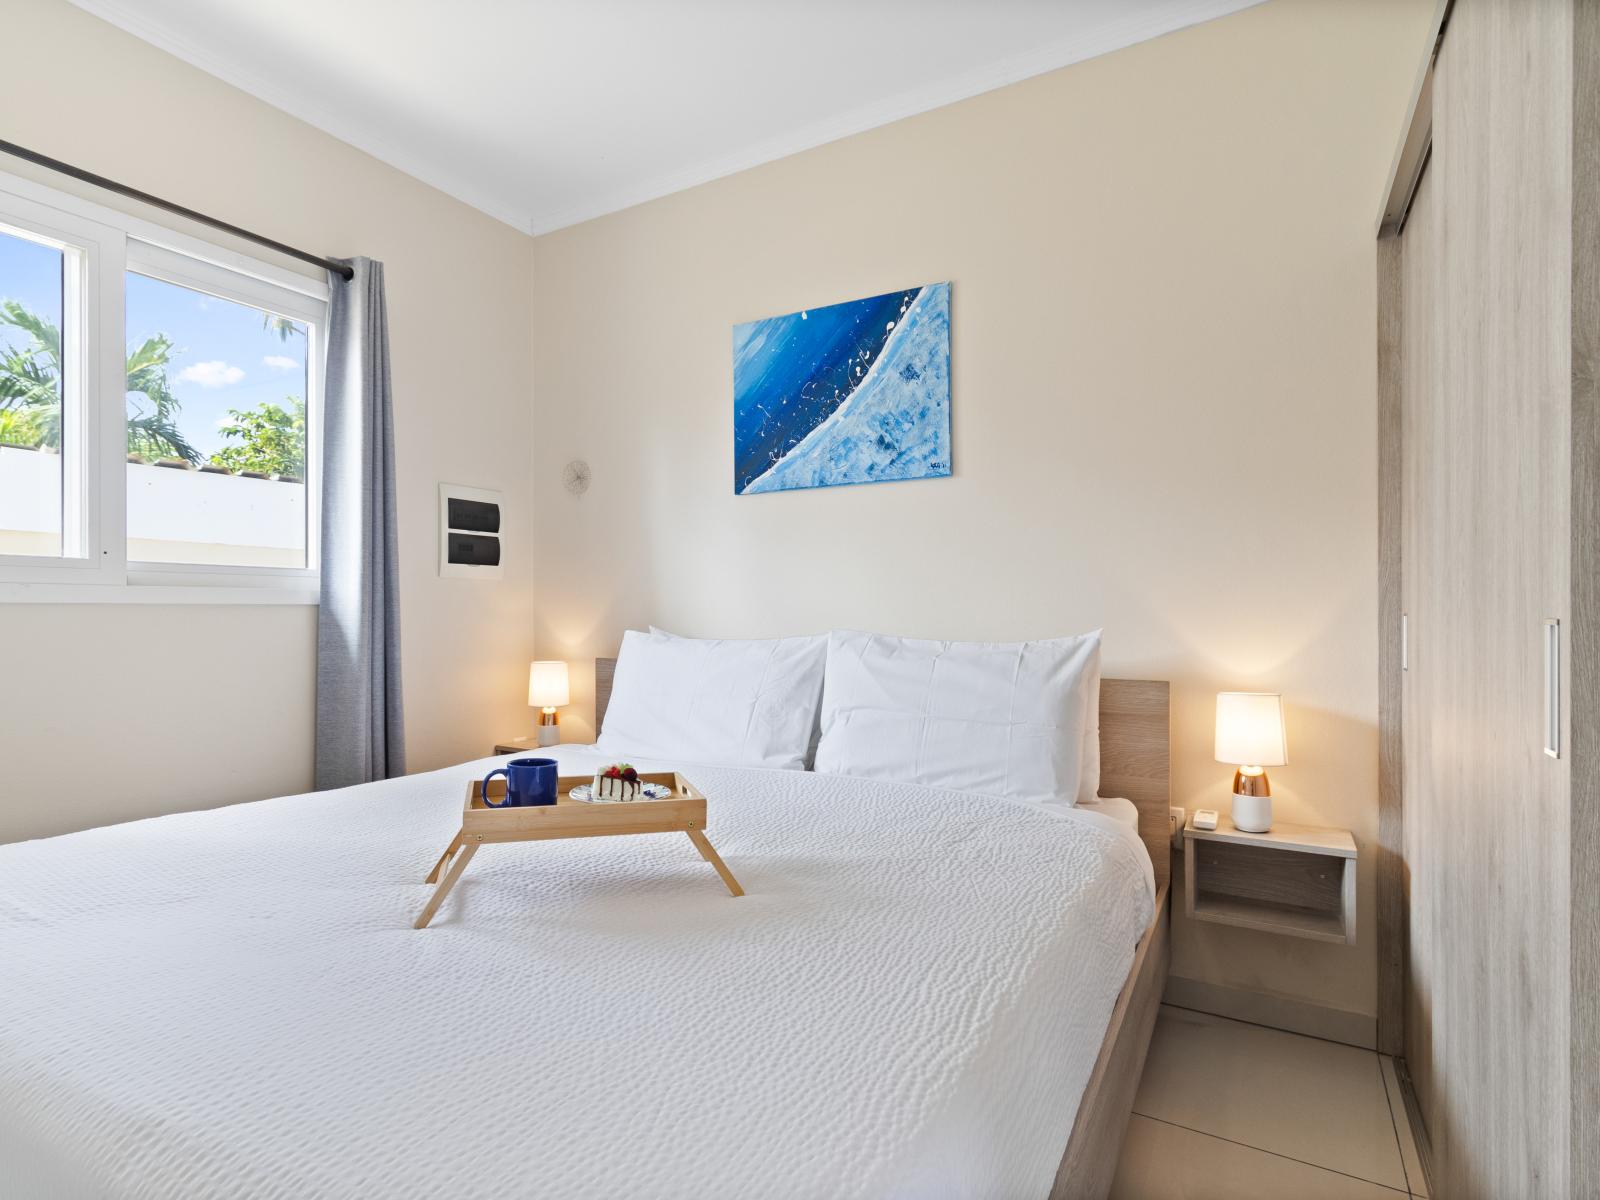 Imposing bedroom of the apartment in Noord, Aruba - Comfy king size bed - Elegantly designed room beautifully decored with large aesthetic wall paintings - Majestic table lamps - Neat and clean linen with soft pillows - Large size bright window